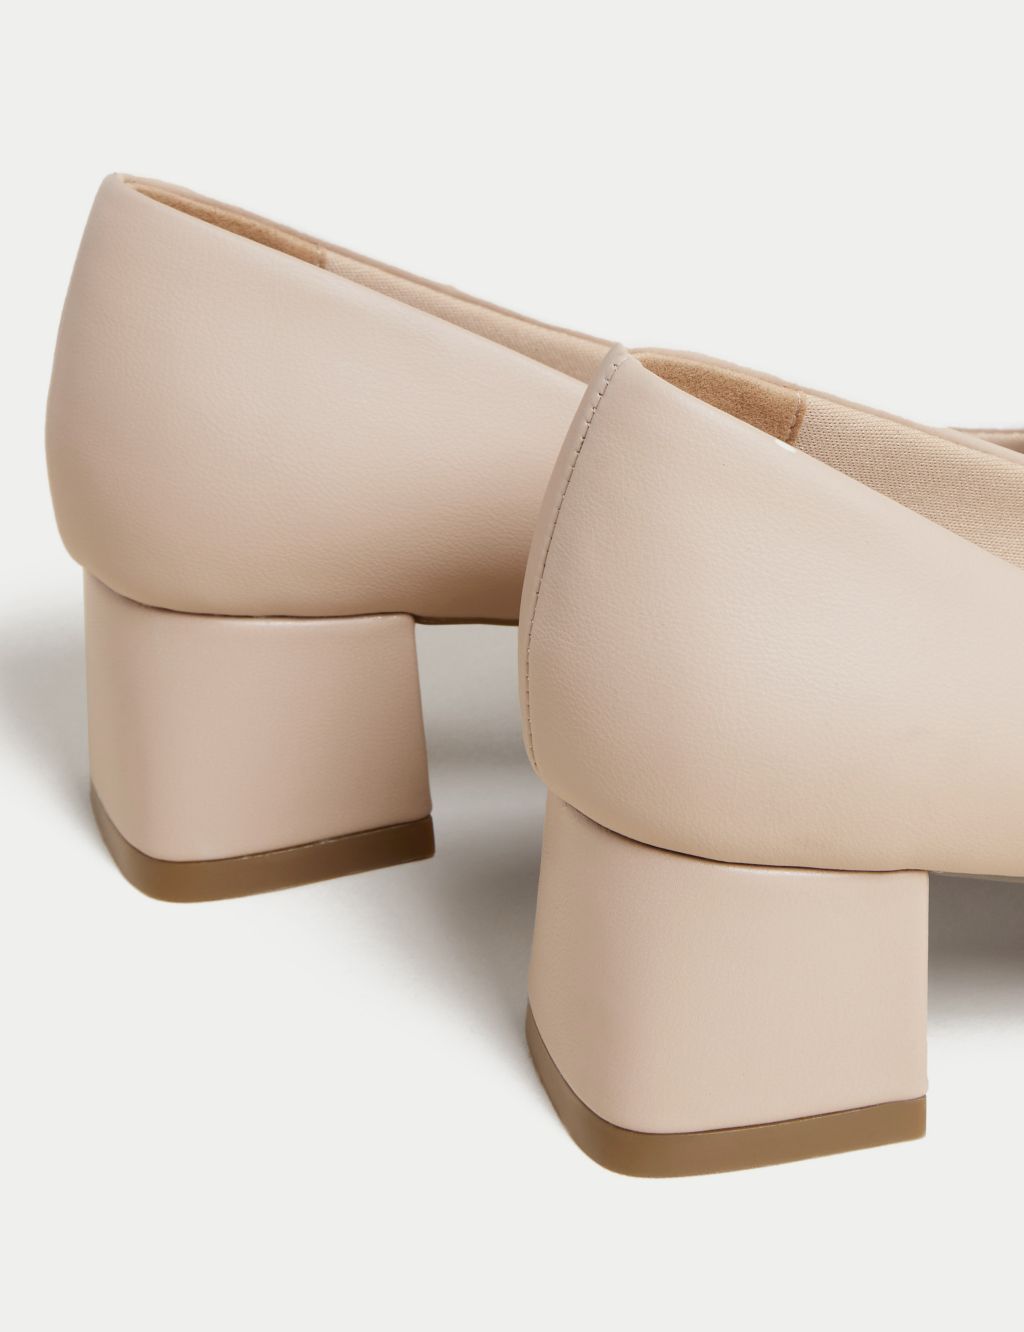 Wide Fit Block Heel Square Toe Shoes image 3